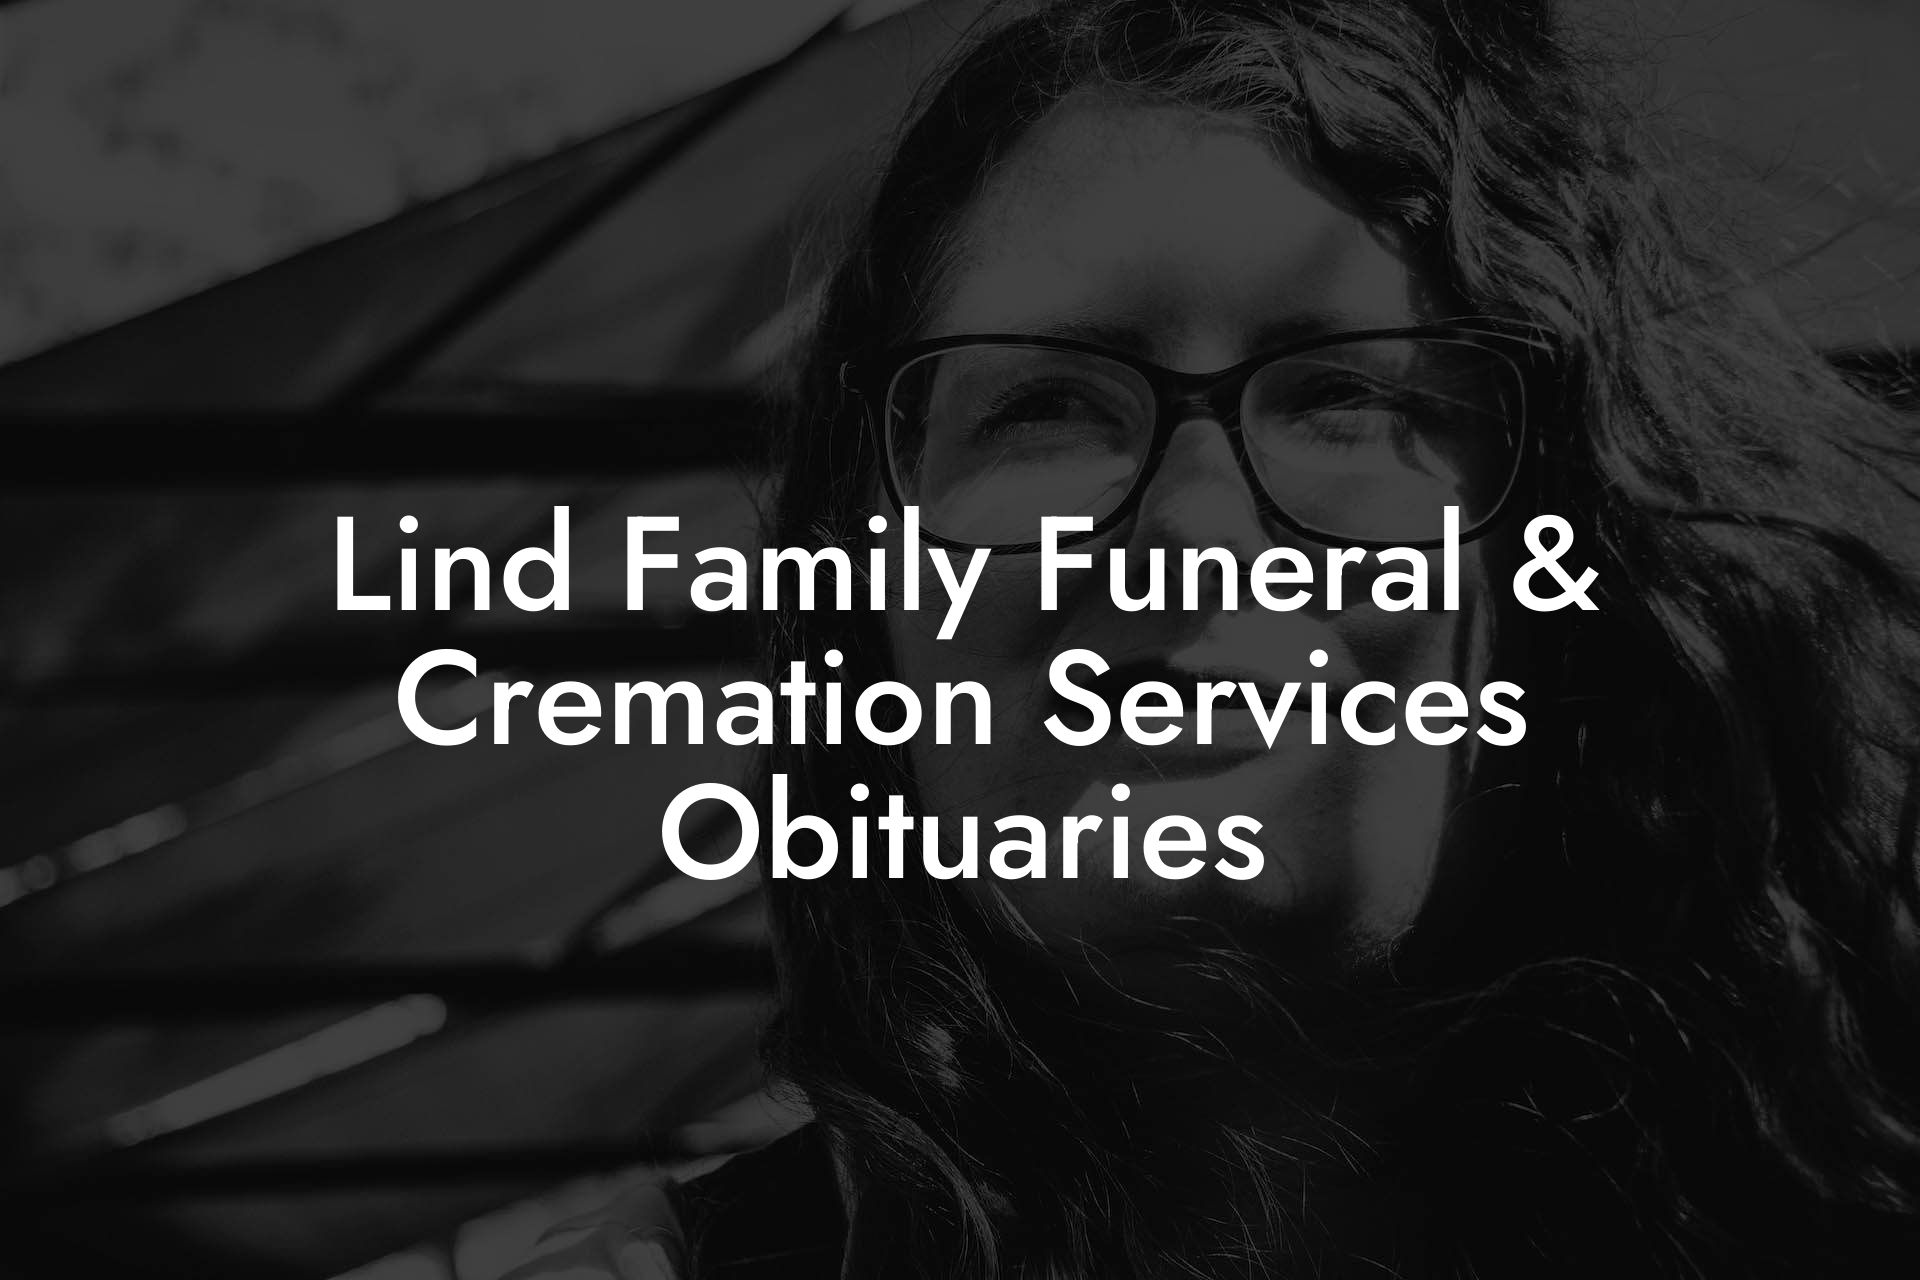 Lind Family Funeral & Cremation Services Obituaries